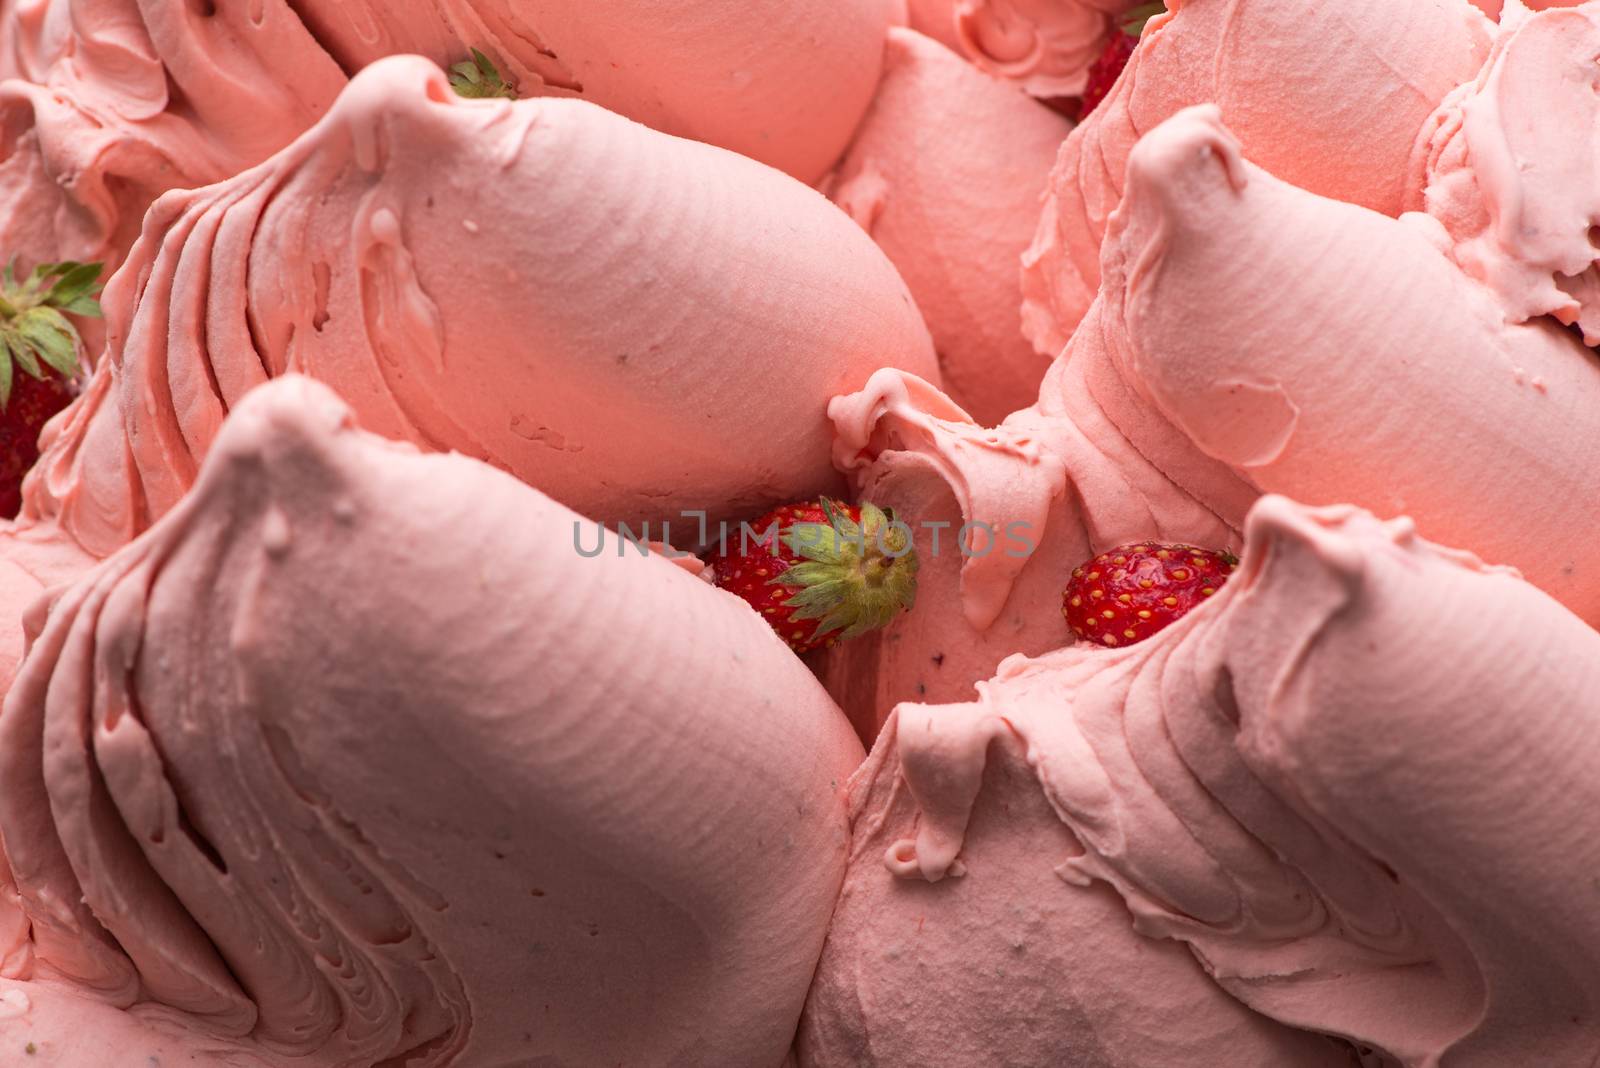 close-up of appetizing ice cream with strawberries, macro photography